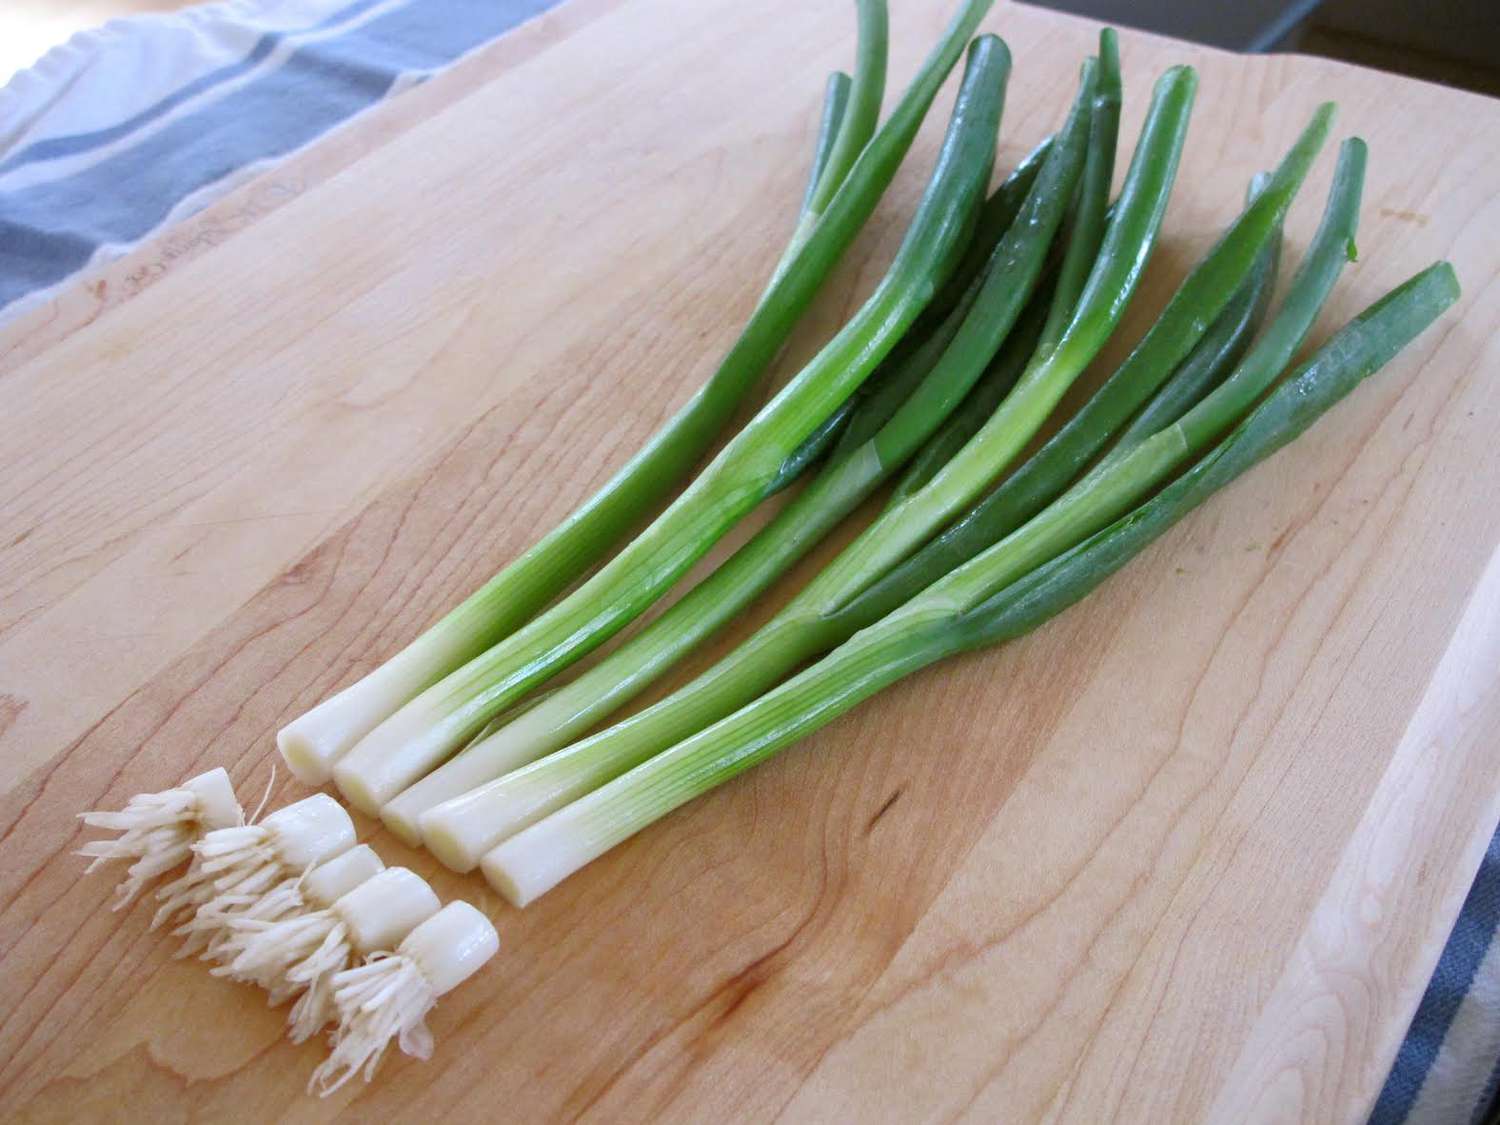 How To Regrow Green Onions From Scraps Allrecipes,Cellulose In Food Definition